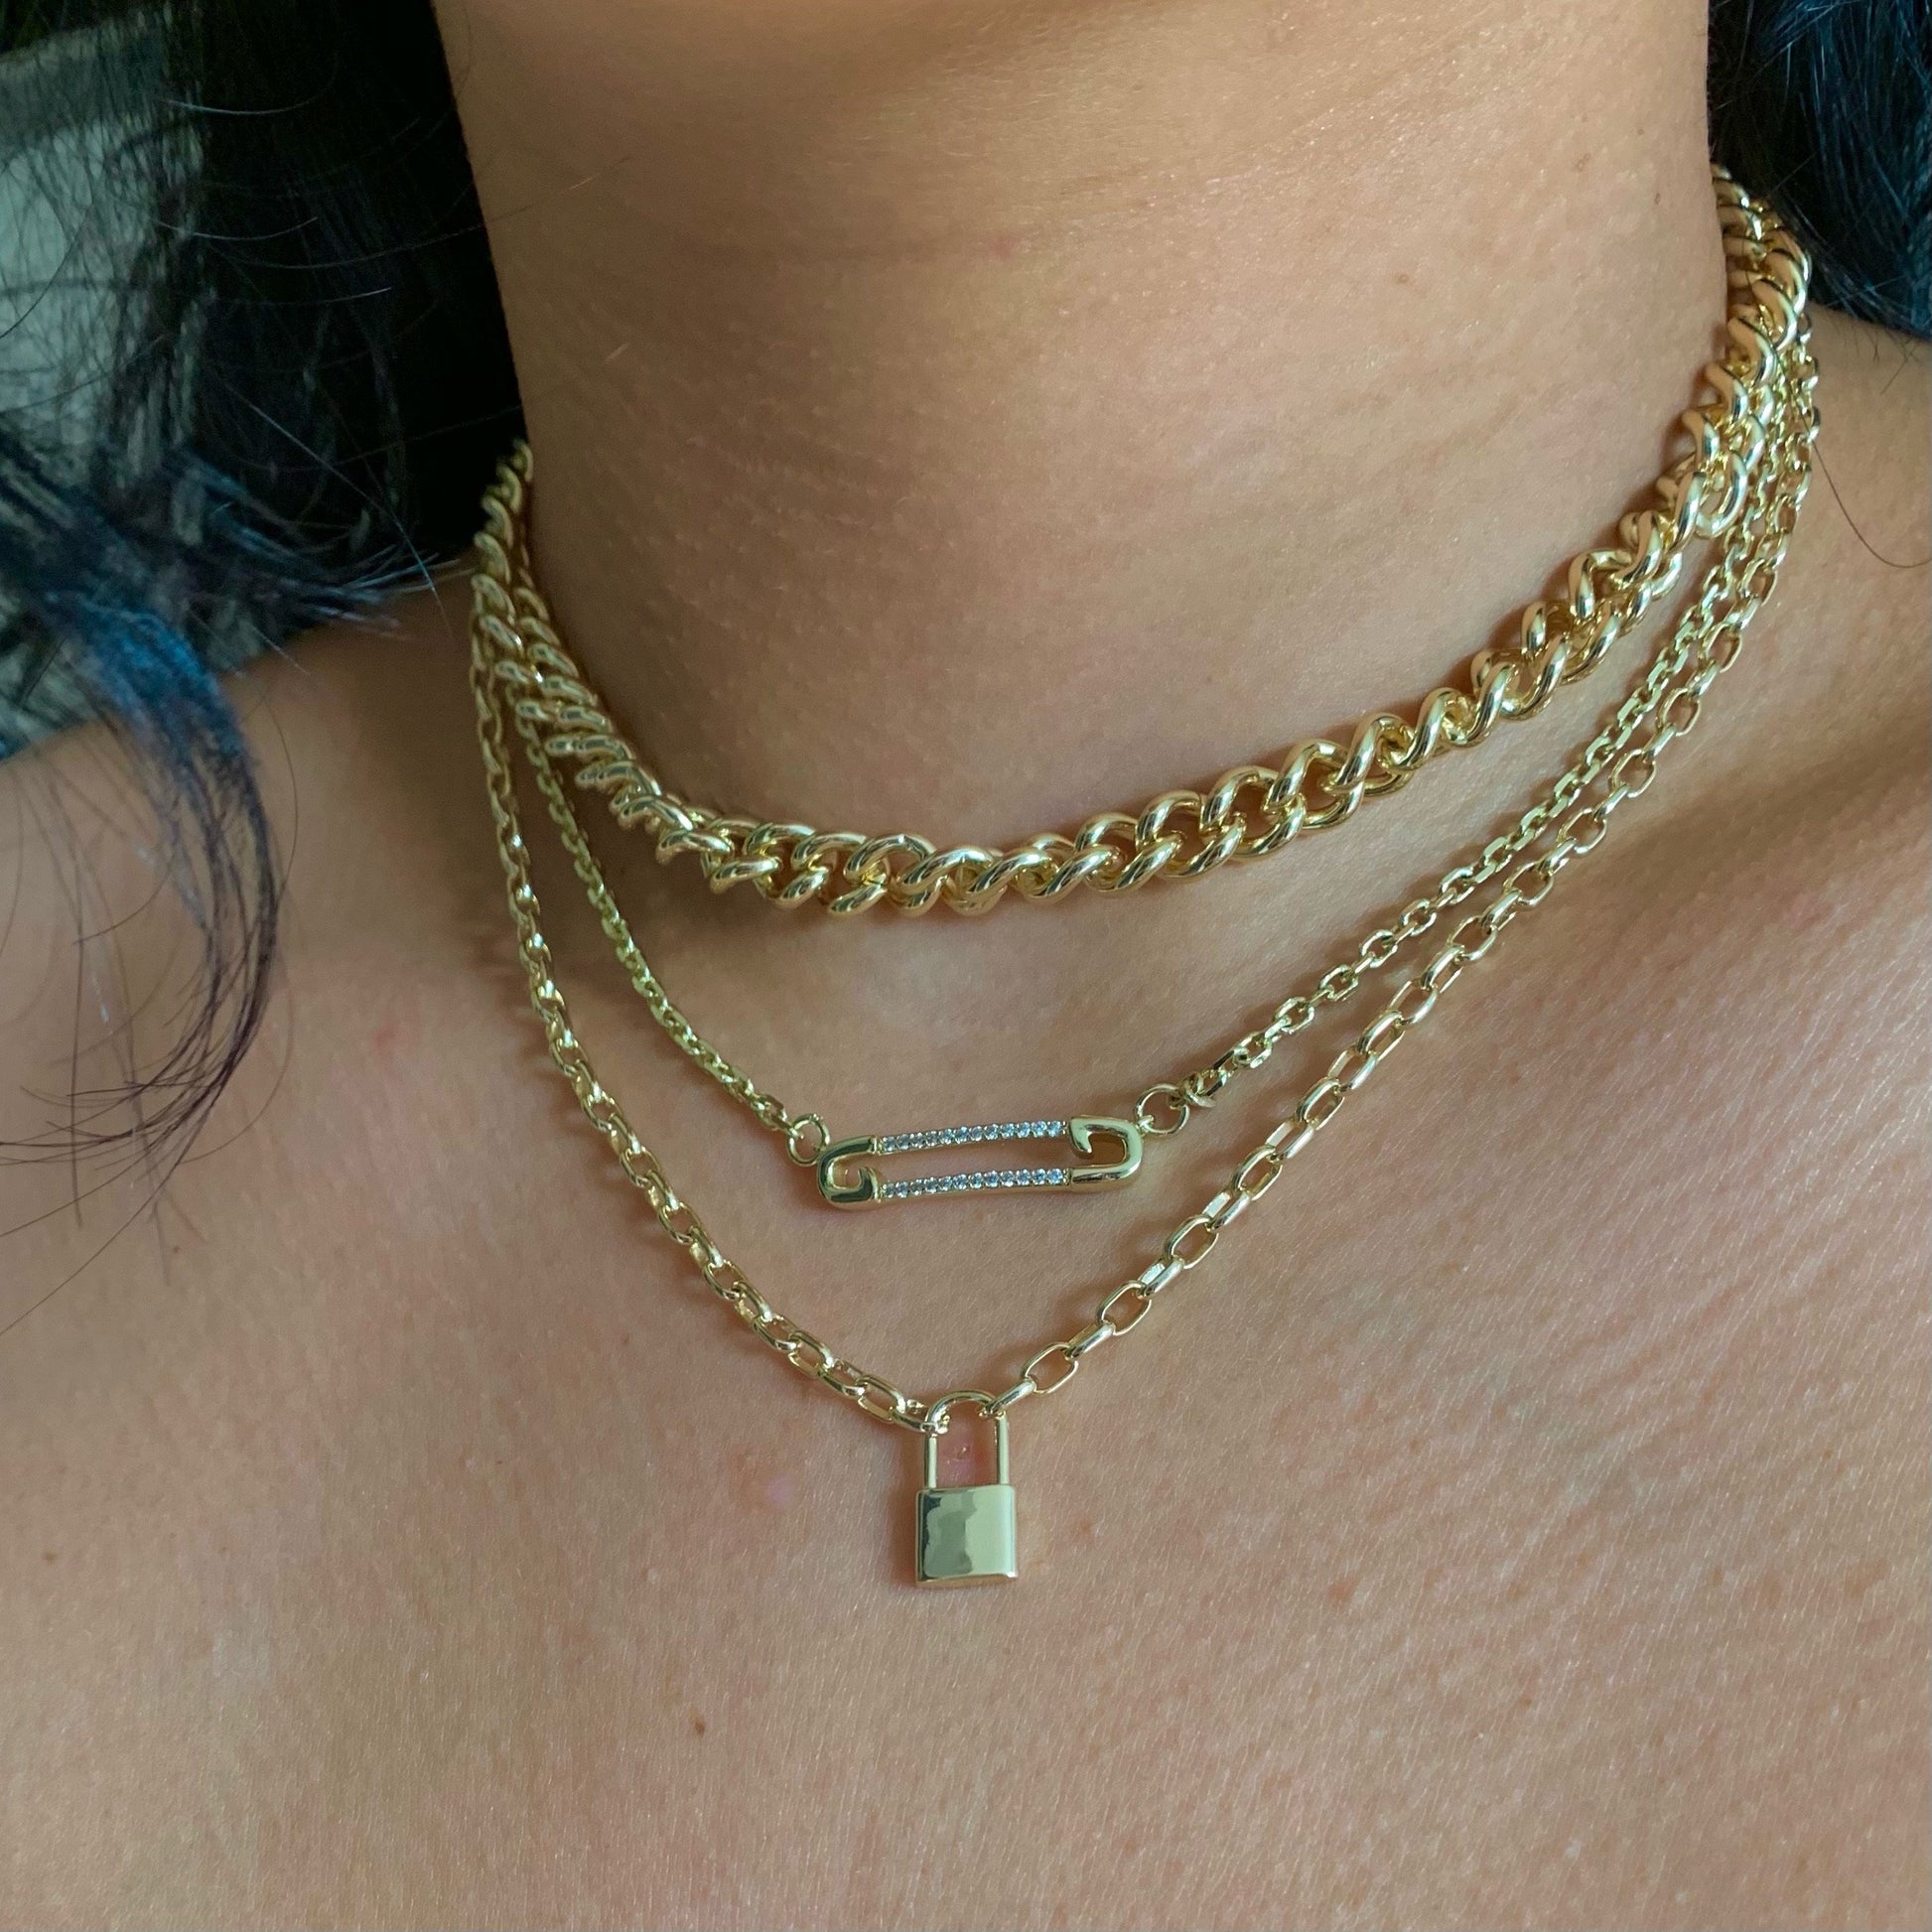 Demon Necklace - Veooy